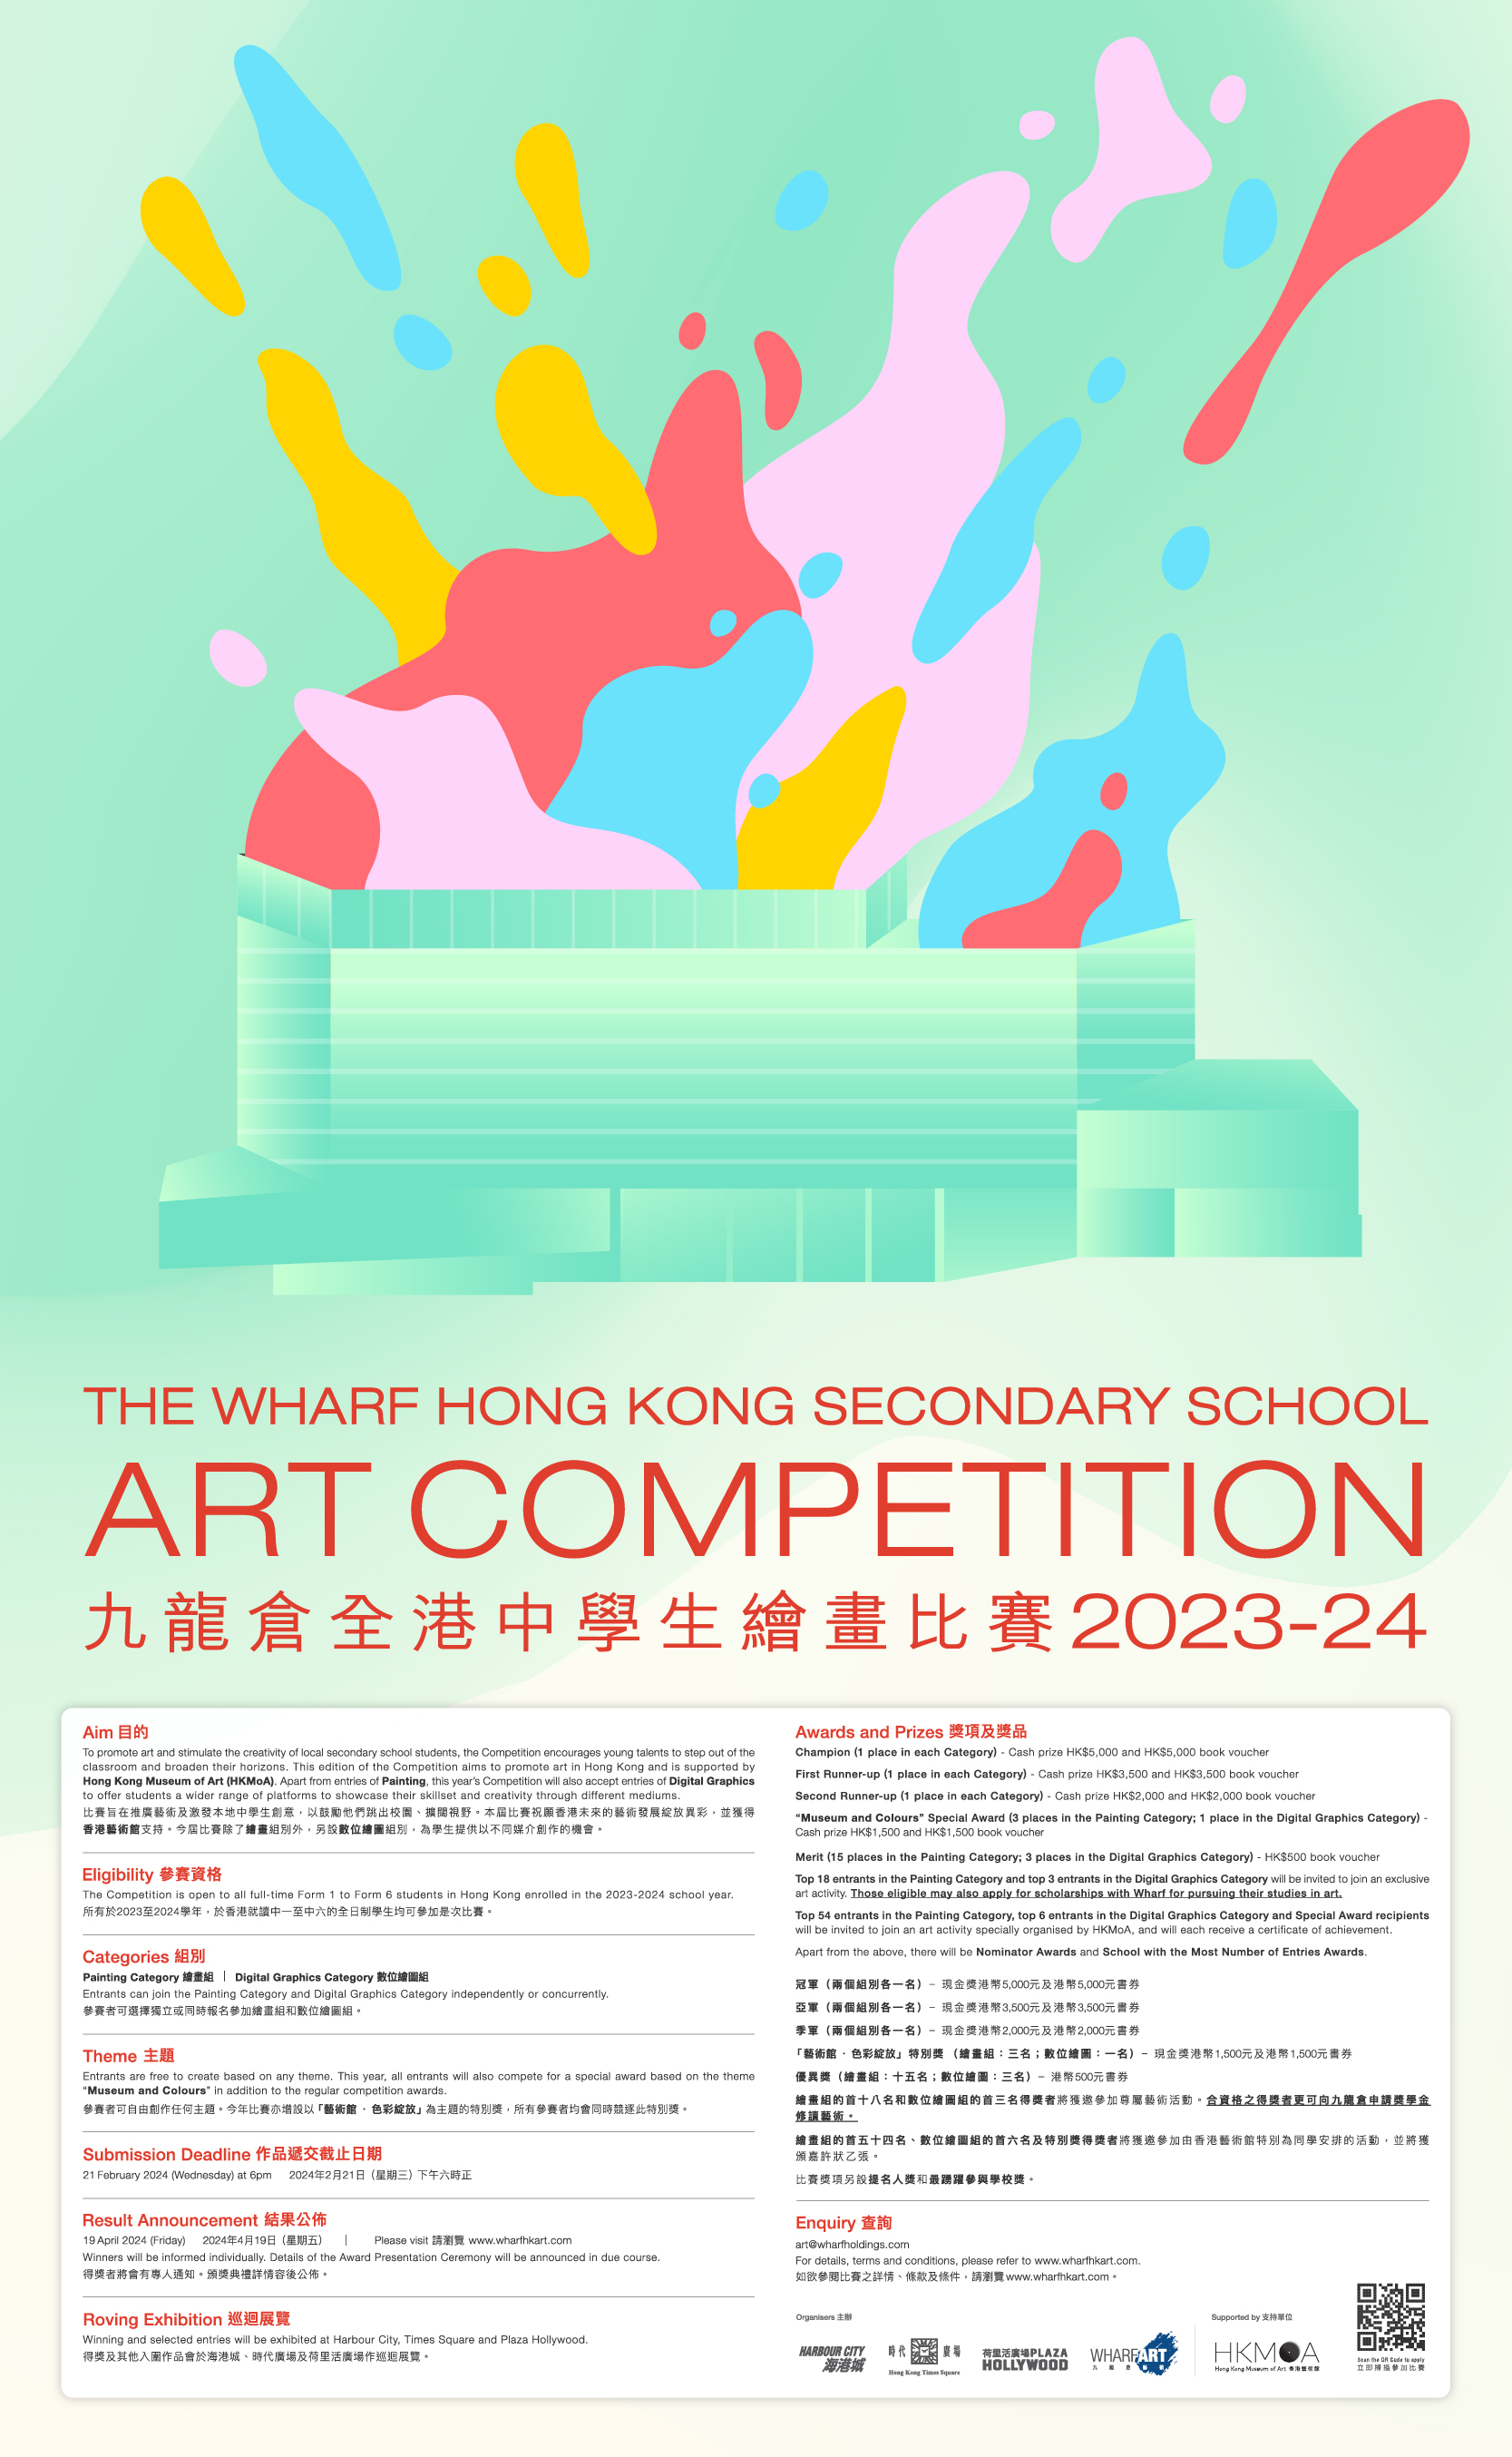 The Wharf Hong Kong Secondary School Art Competition 2023-24